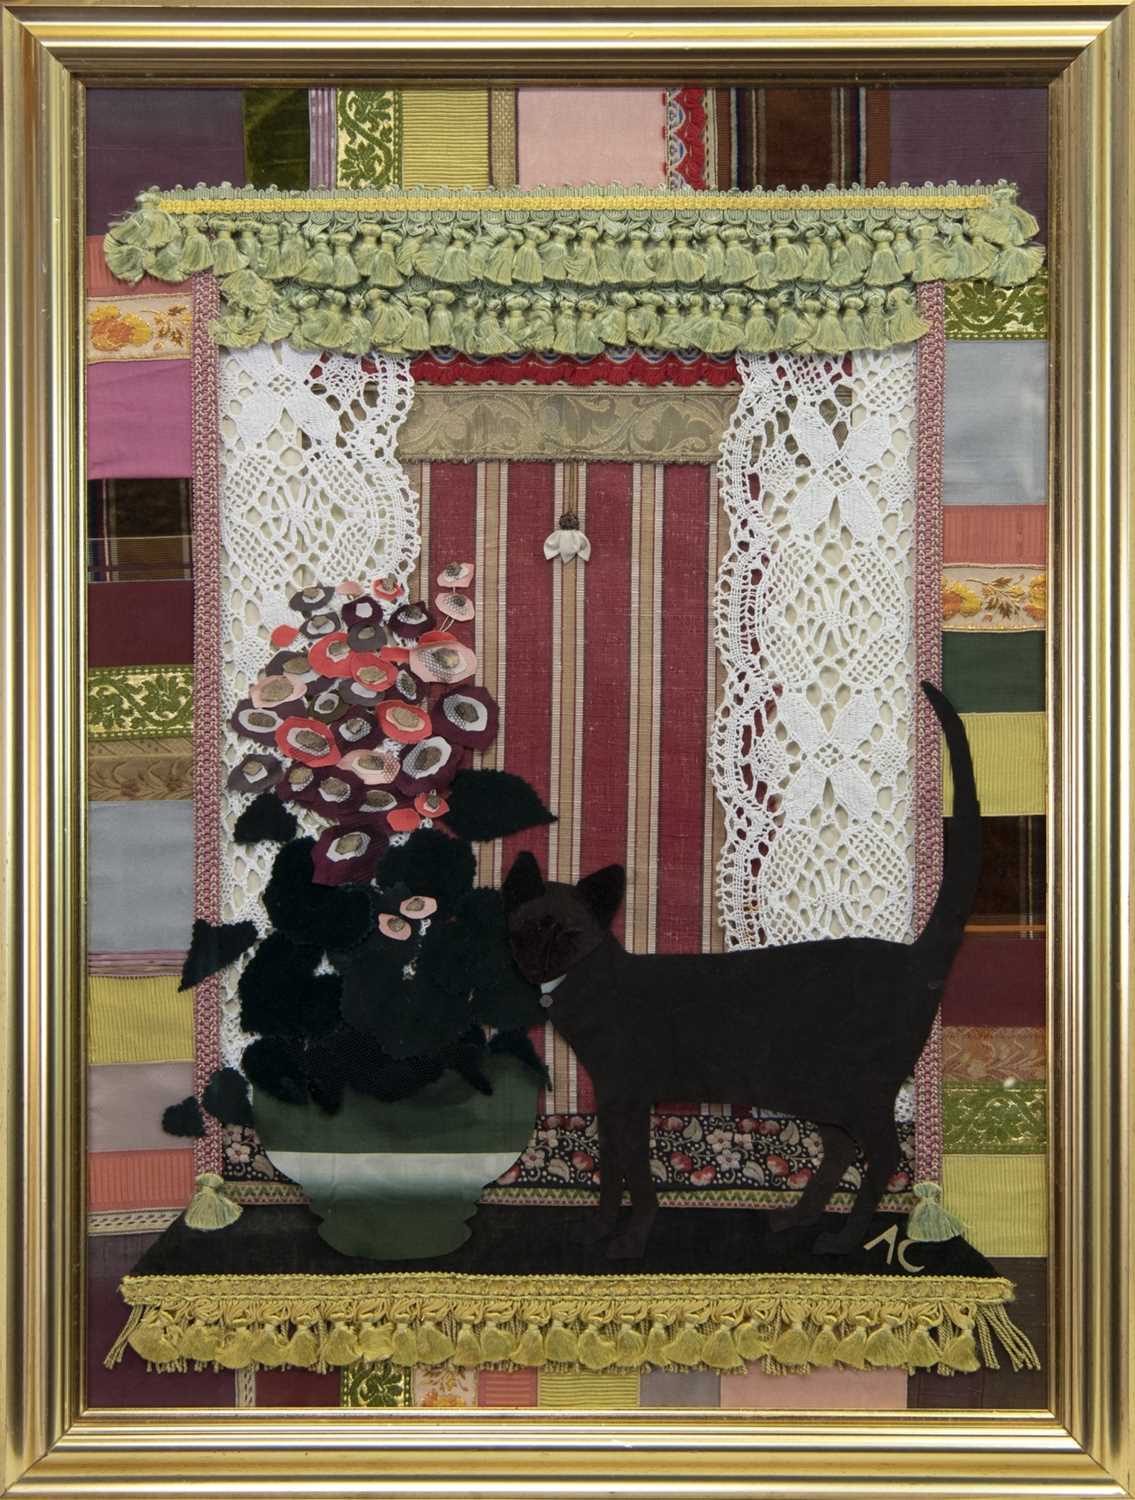 Lot 405 - BLACK CAT BY THE WINDOW, A MIXED MEDIA COLLAGE BY ANNE CARPENTER